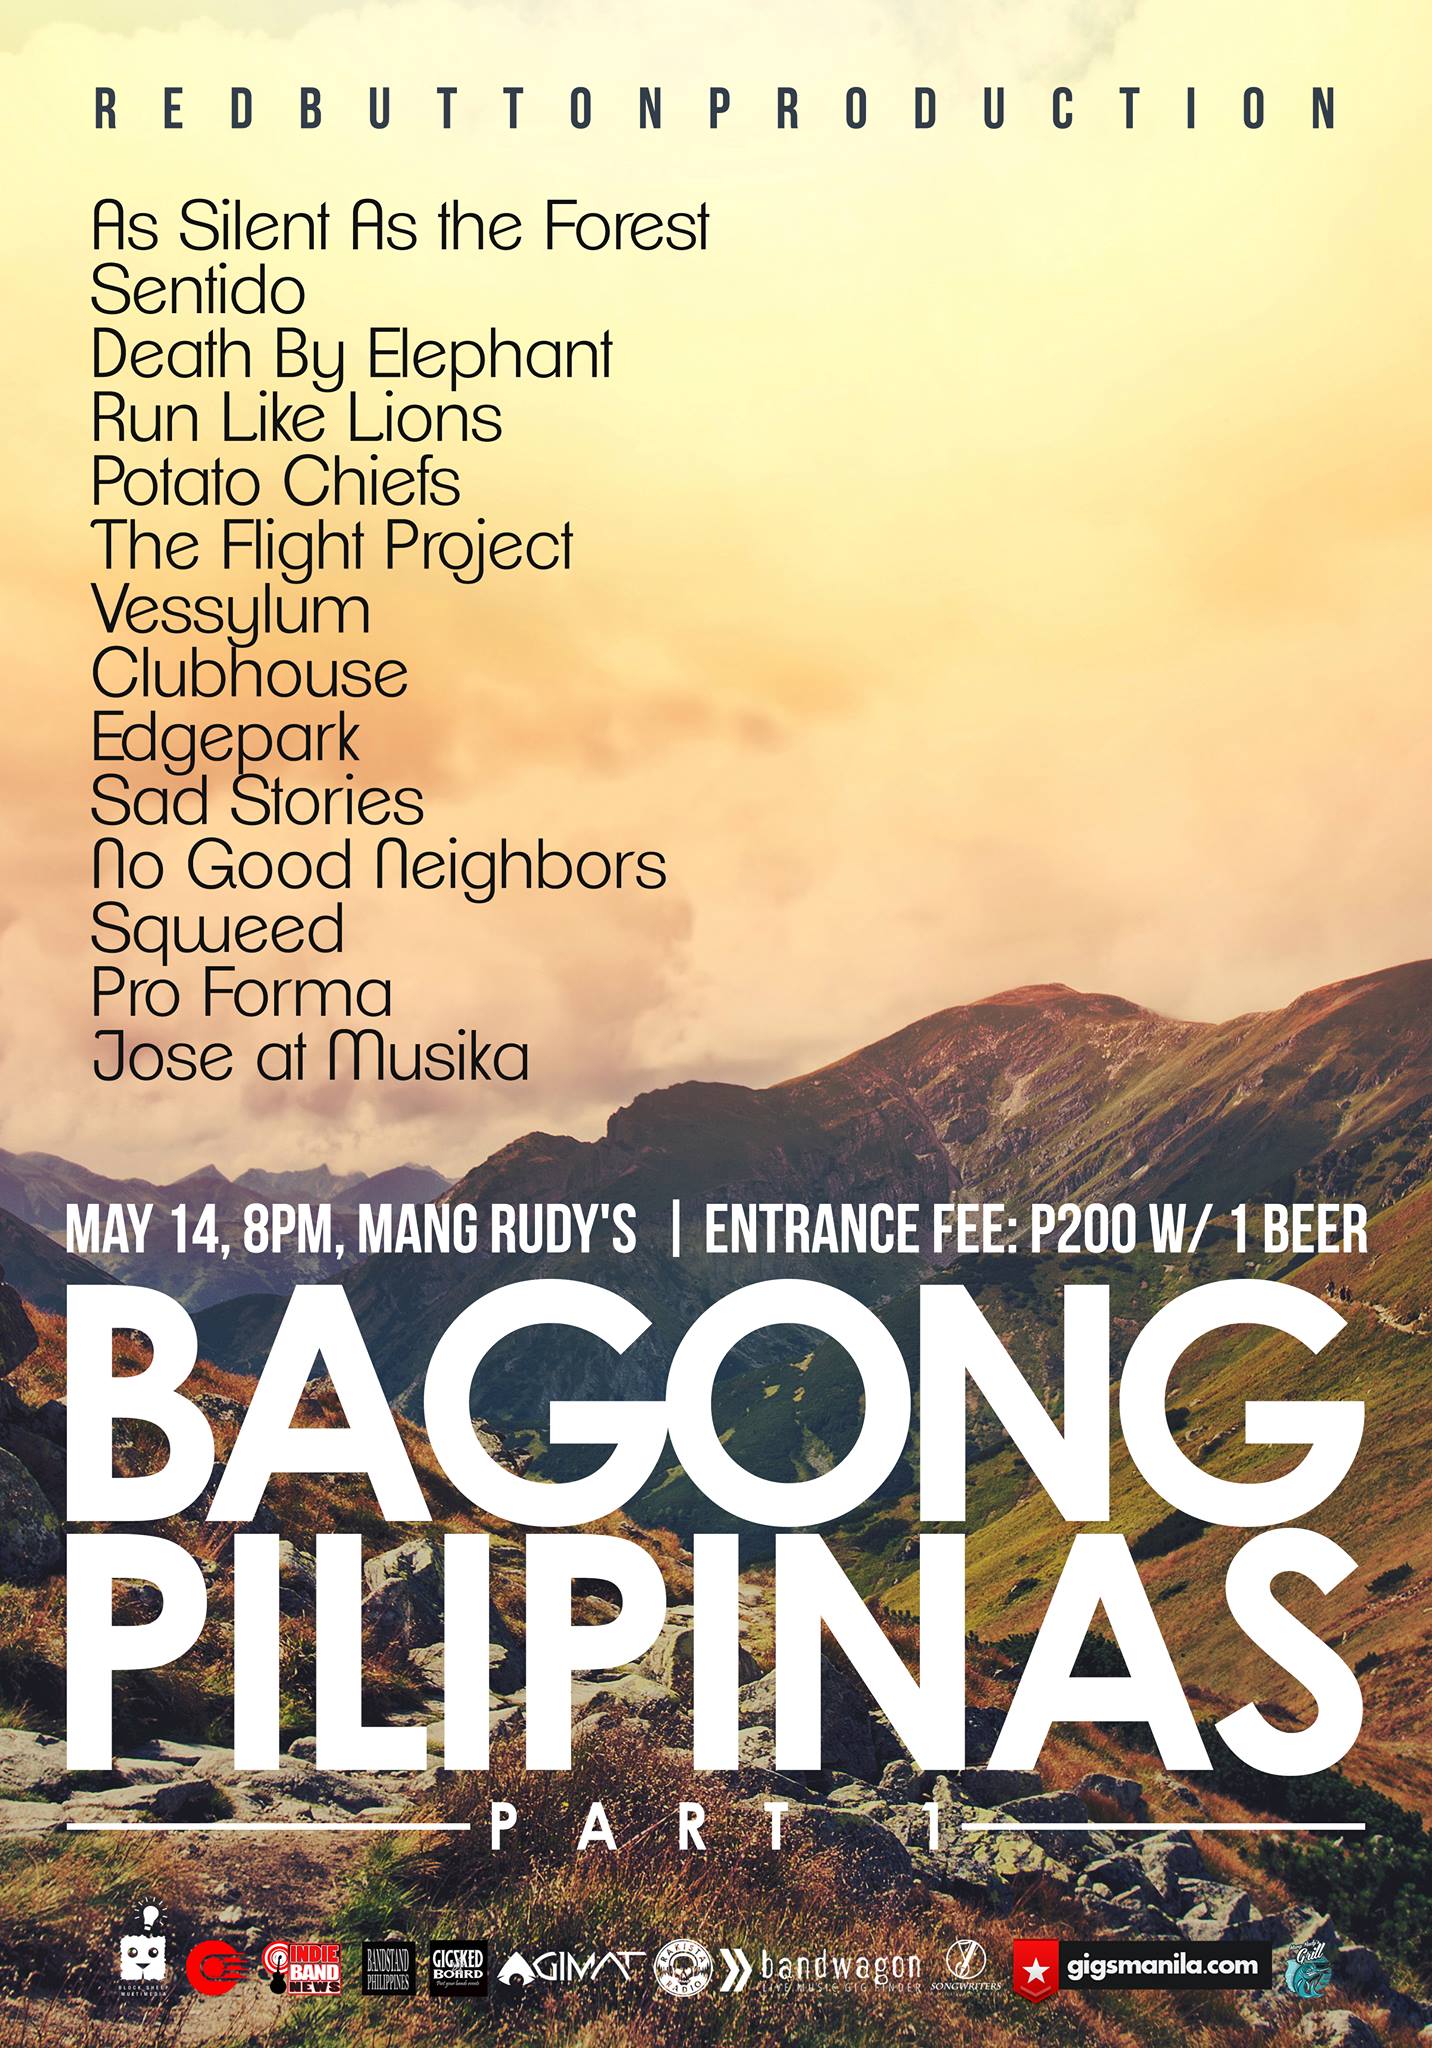 Bagong Pilipinas: Part 1 clock Saturday at 7 PM 3 days from now · 79–97° Partly Cloudy pin Show Map Mang Rudy's Tuna Grill And Papaitan 148 A Yakal Street San Antonio Village, 1230 Makati, Philippines Red Button Production presents: "Bagong Pilipinas: Part 1" May 14, Saturday - 8PM Mang Rudy's, Yakal St., Makati Entrance Fee: P200 w/ Beer performances by: As Silent As the Forest Sentido Death By Elephant Run Like Lions Potato Chiefs The Flight Project Vessylum Clubhouse Edgepark Sad Stories No Good Neighbors Sqweed Pro Forma Jose at Musika